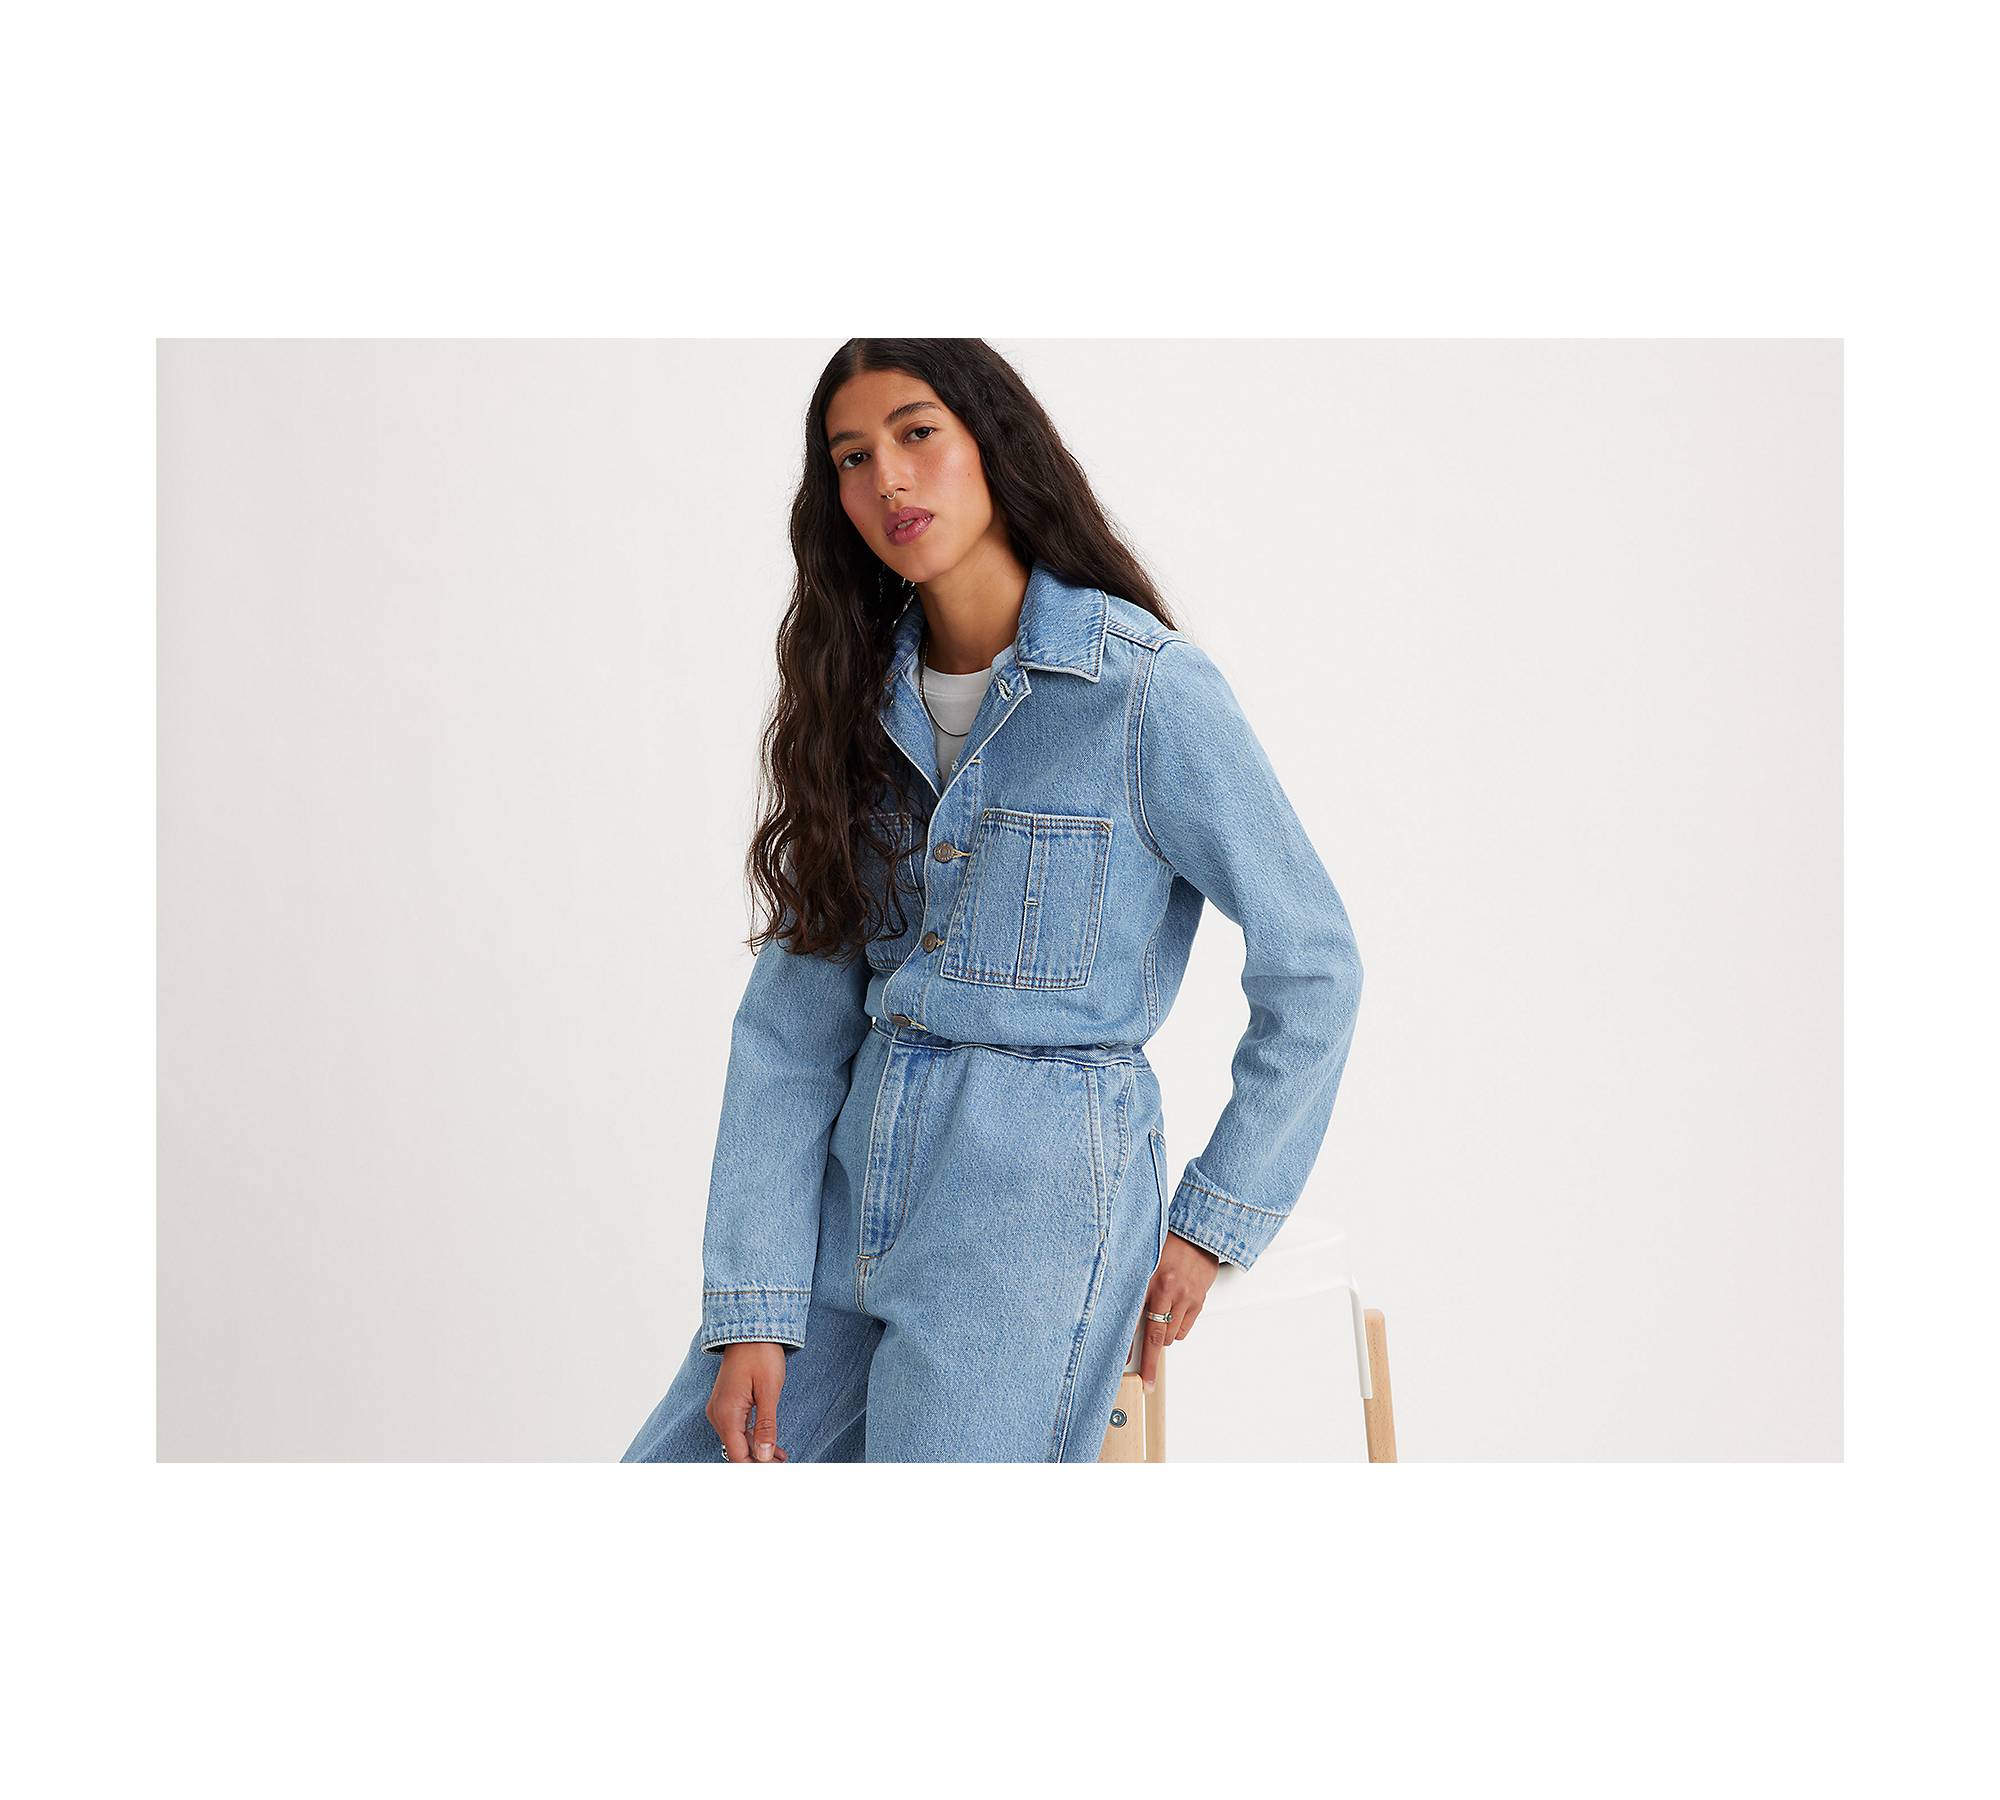 Japanese Women Girls' Cute Jeans Jumpsuit Loose Overalls trousers